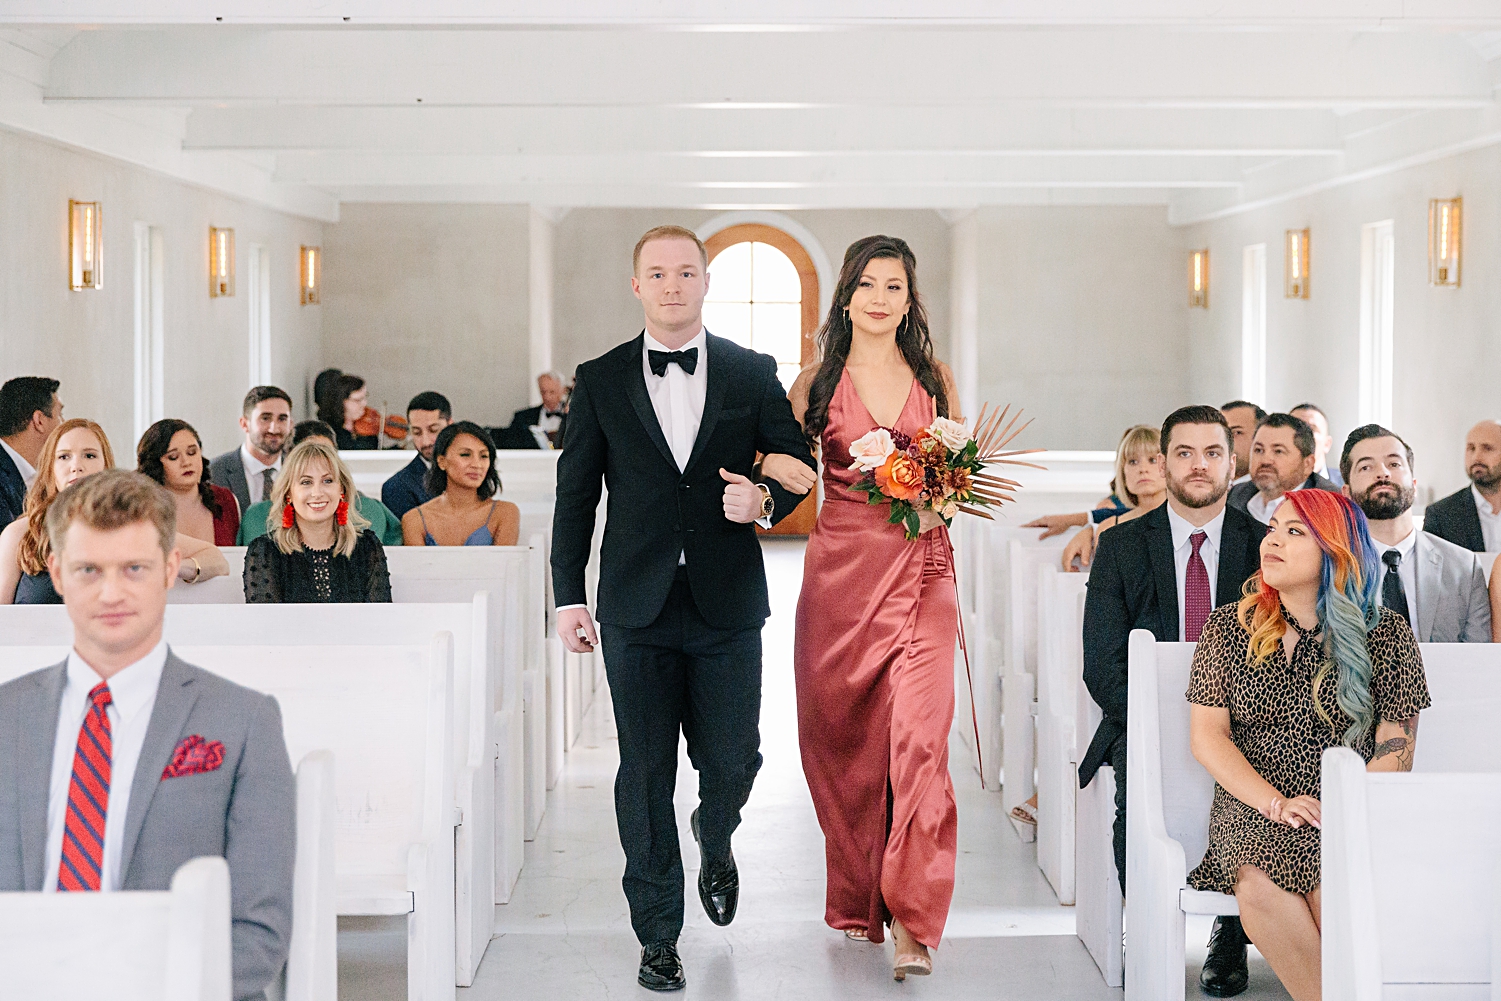 groomsman and bridesmaid in rose gold dress walking down aisle of white chapel wedding